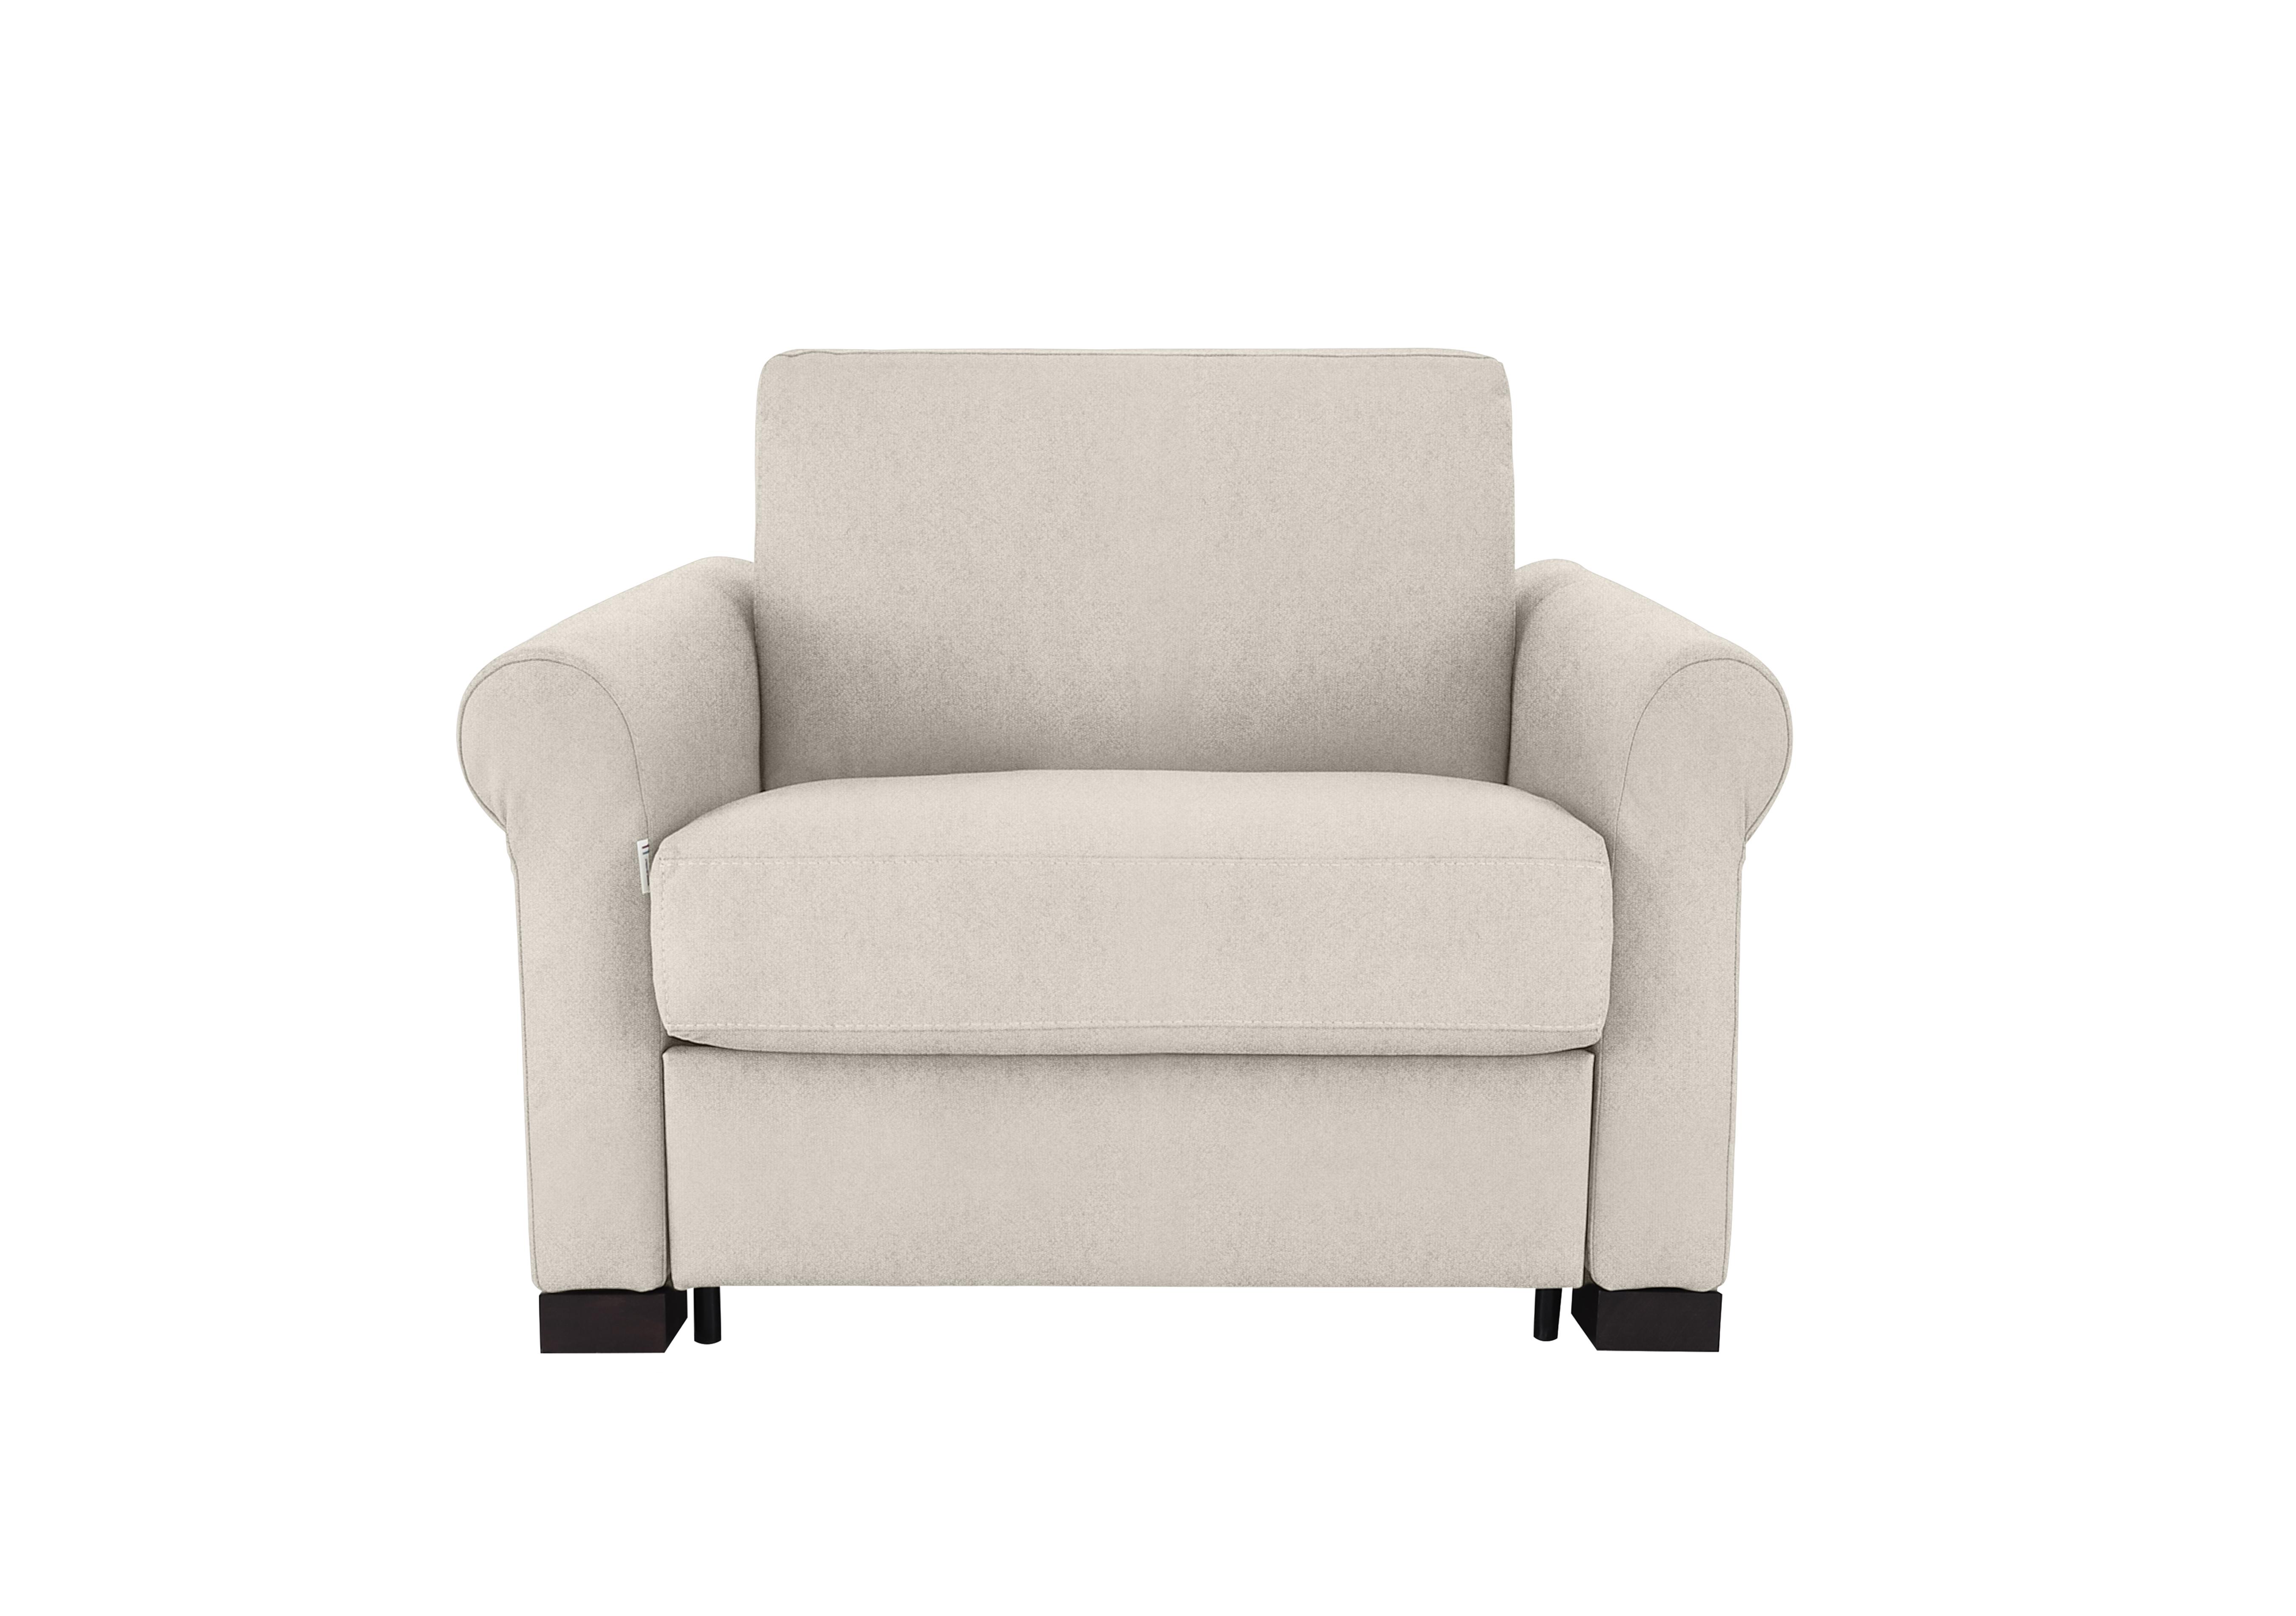 Alcova Fabric Chair Sofa Bed with Scroll Arms in Fuente Beige on Furniture Village